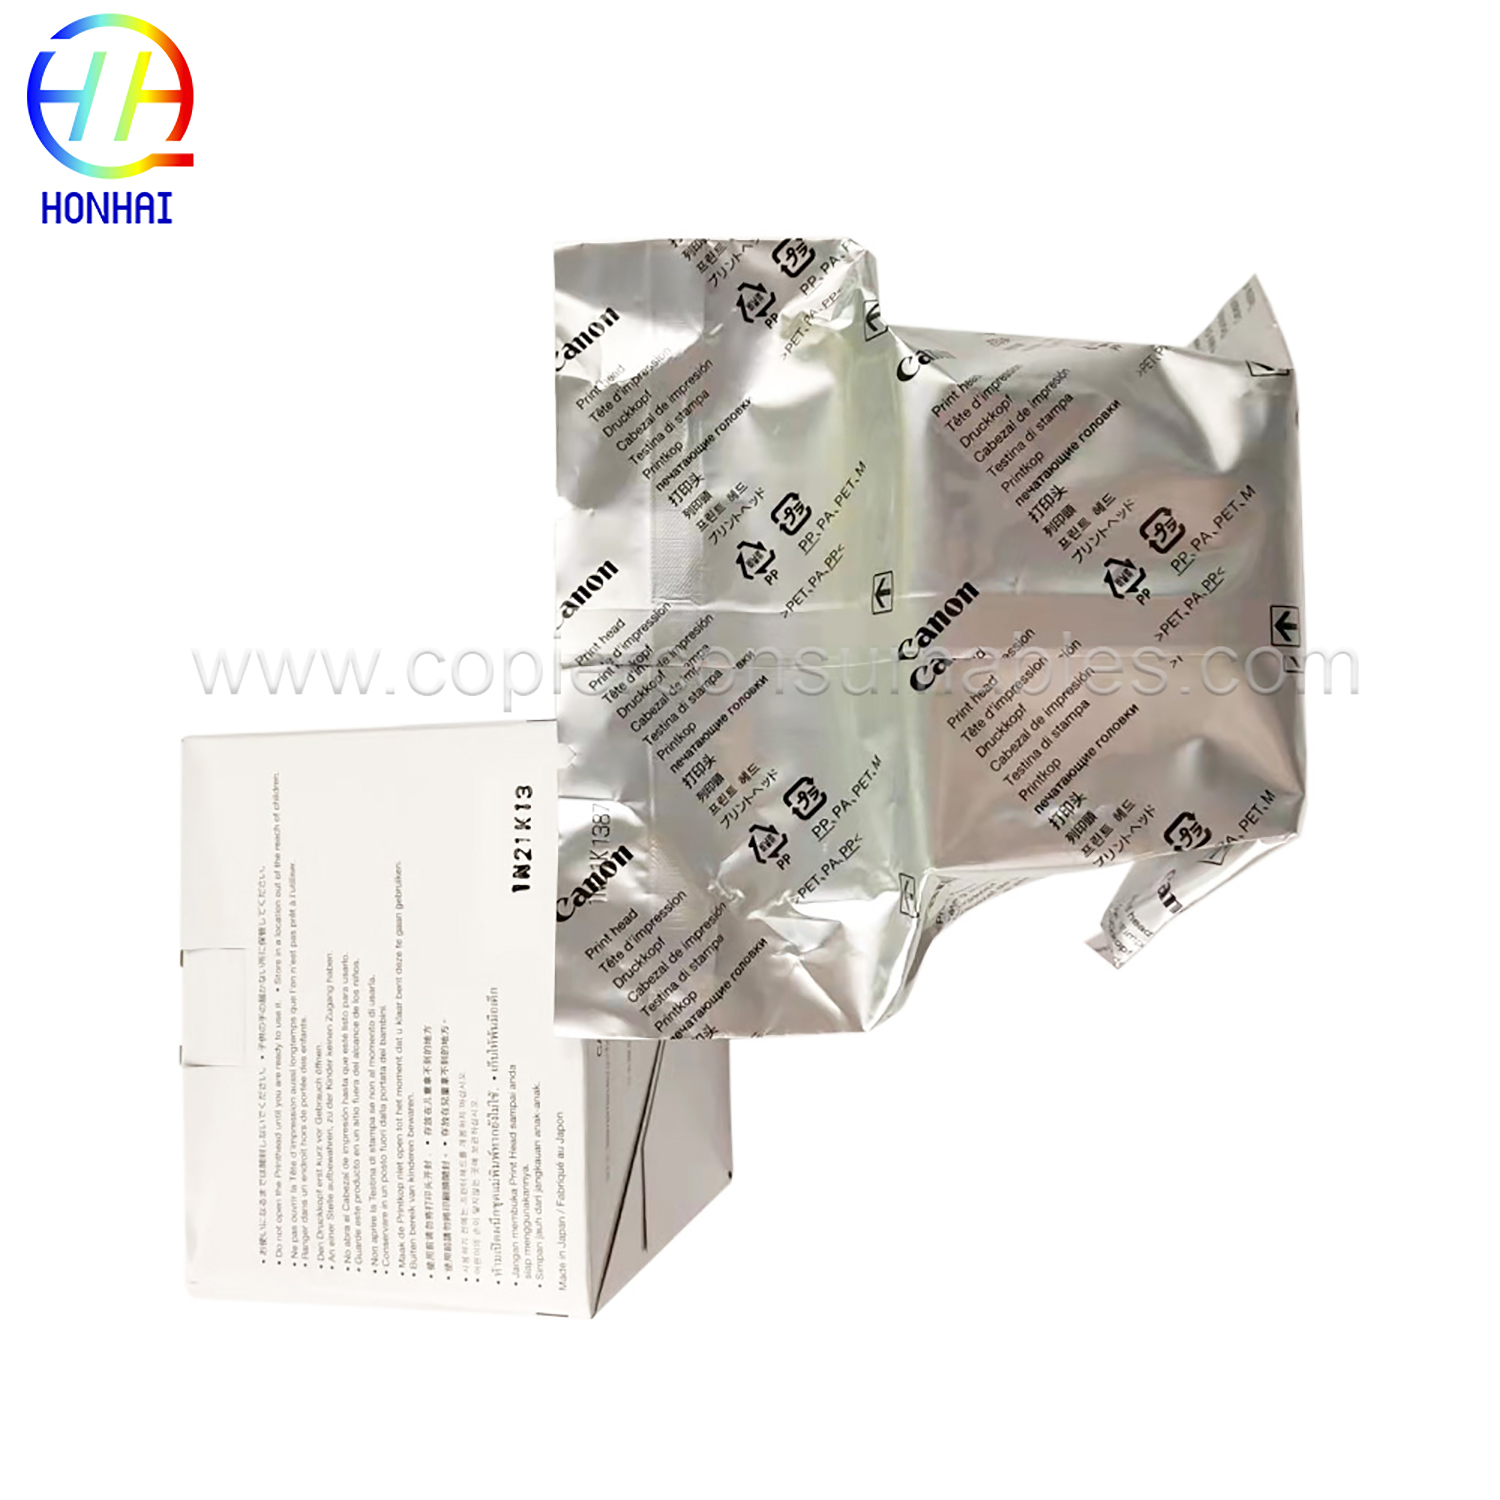 Printhead for CANON QY6-0087-000 Maxify ib4020 mb2020 mb2320 mb5020 (2) 拷贝